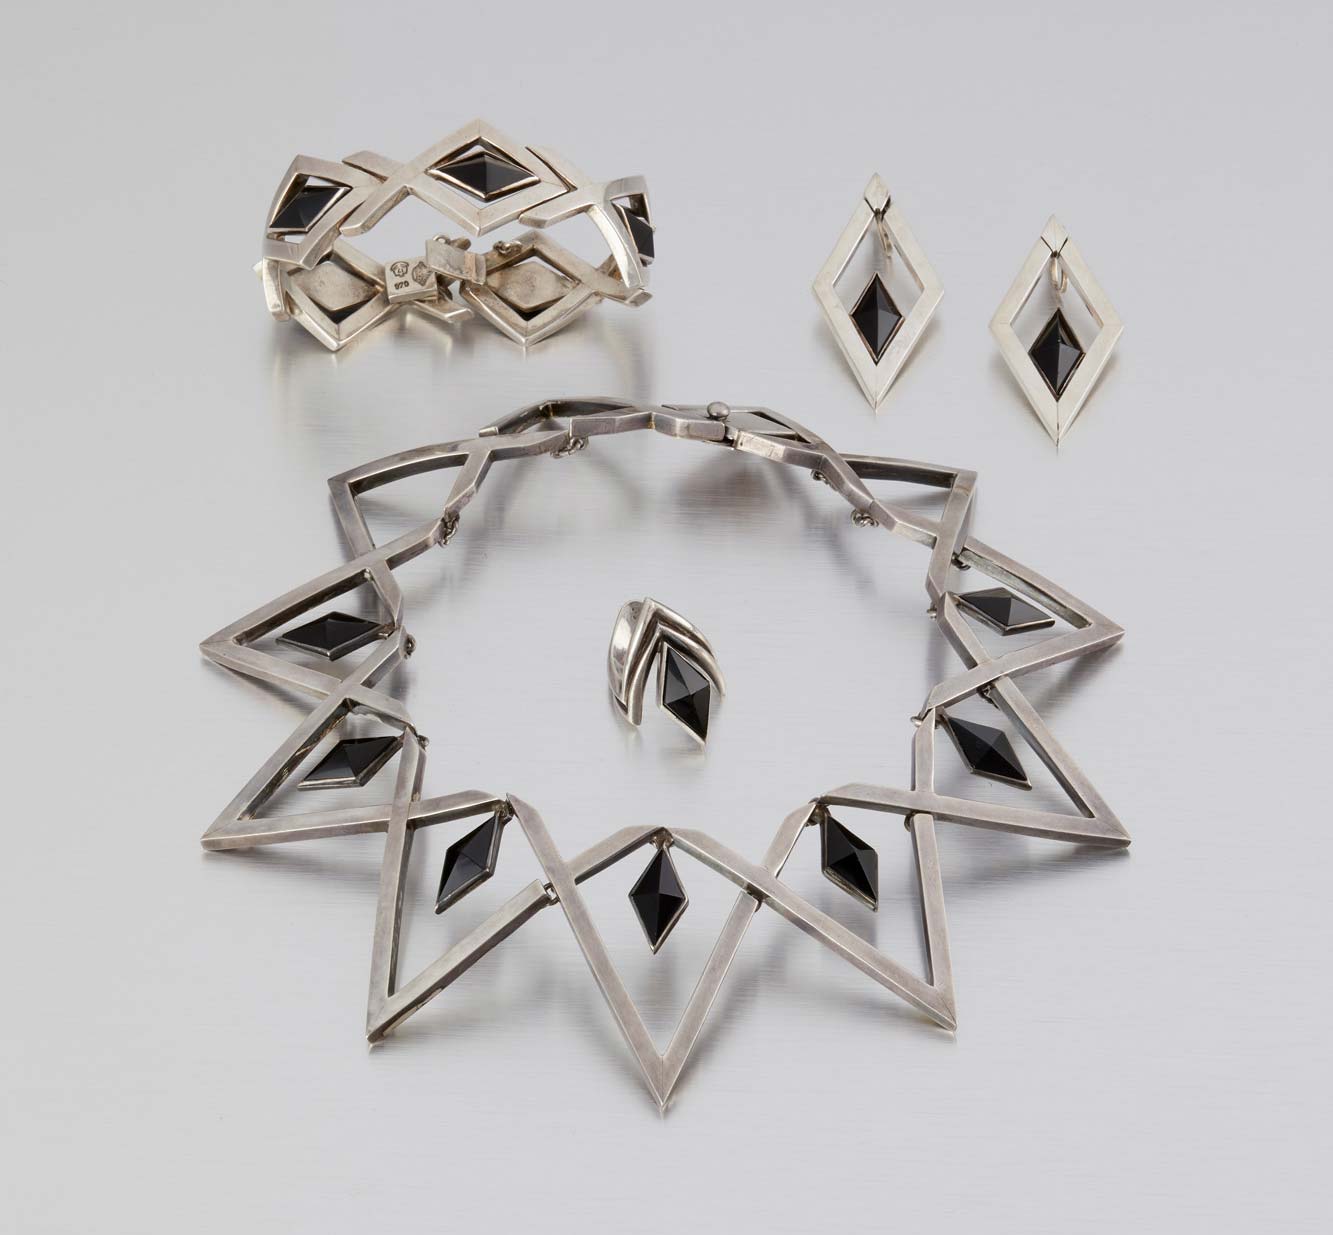 A suite of Antonio Pineda silver and obsidian jewelry, $2,000-$3,00. Image courtesy John Moran Auctioneers